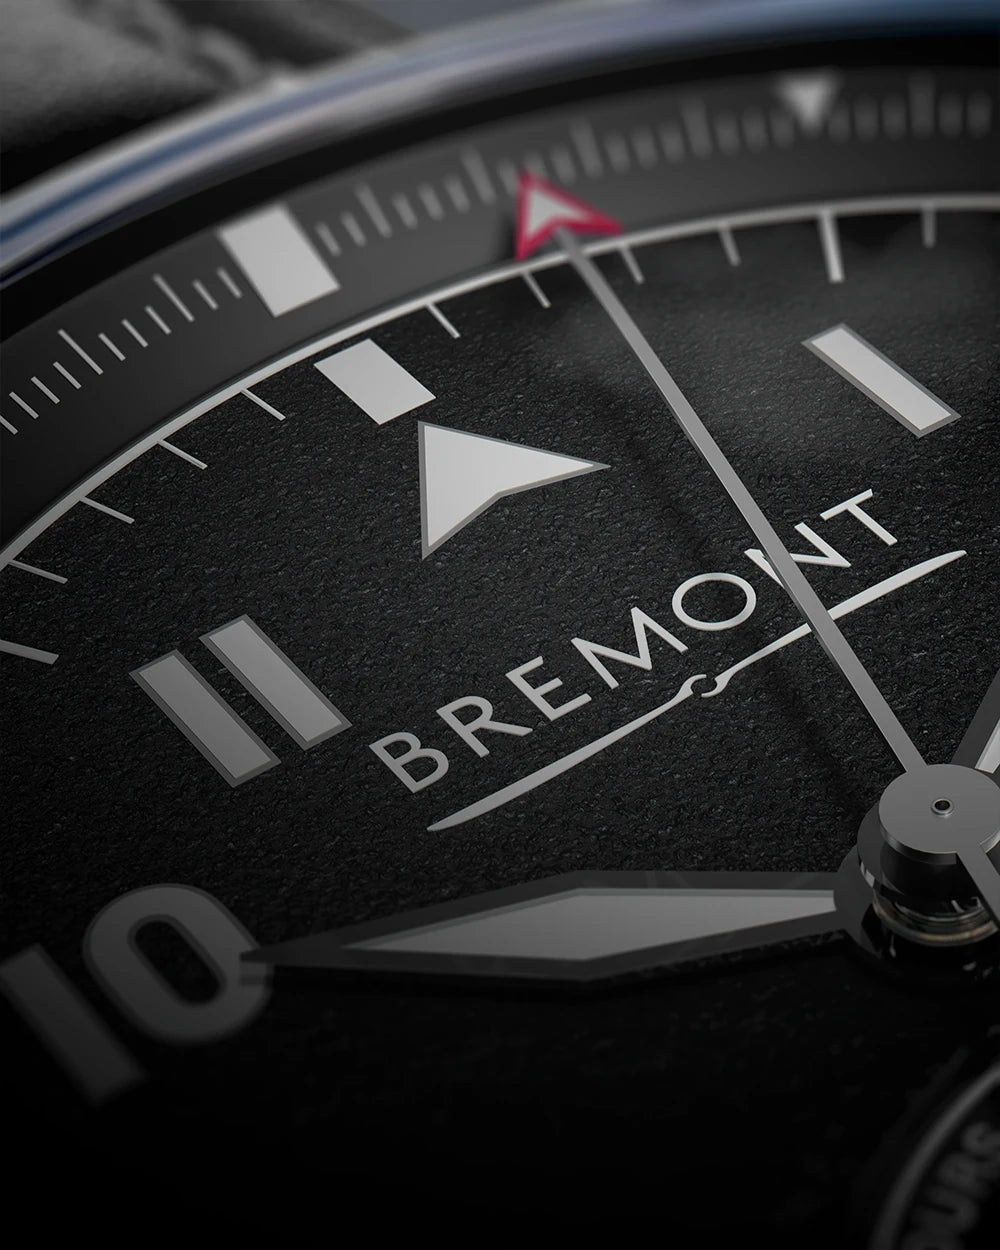 Designed to be highly legible, Bremont pilot watches feature clear, easy to read numerals and markings on the dial.